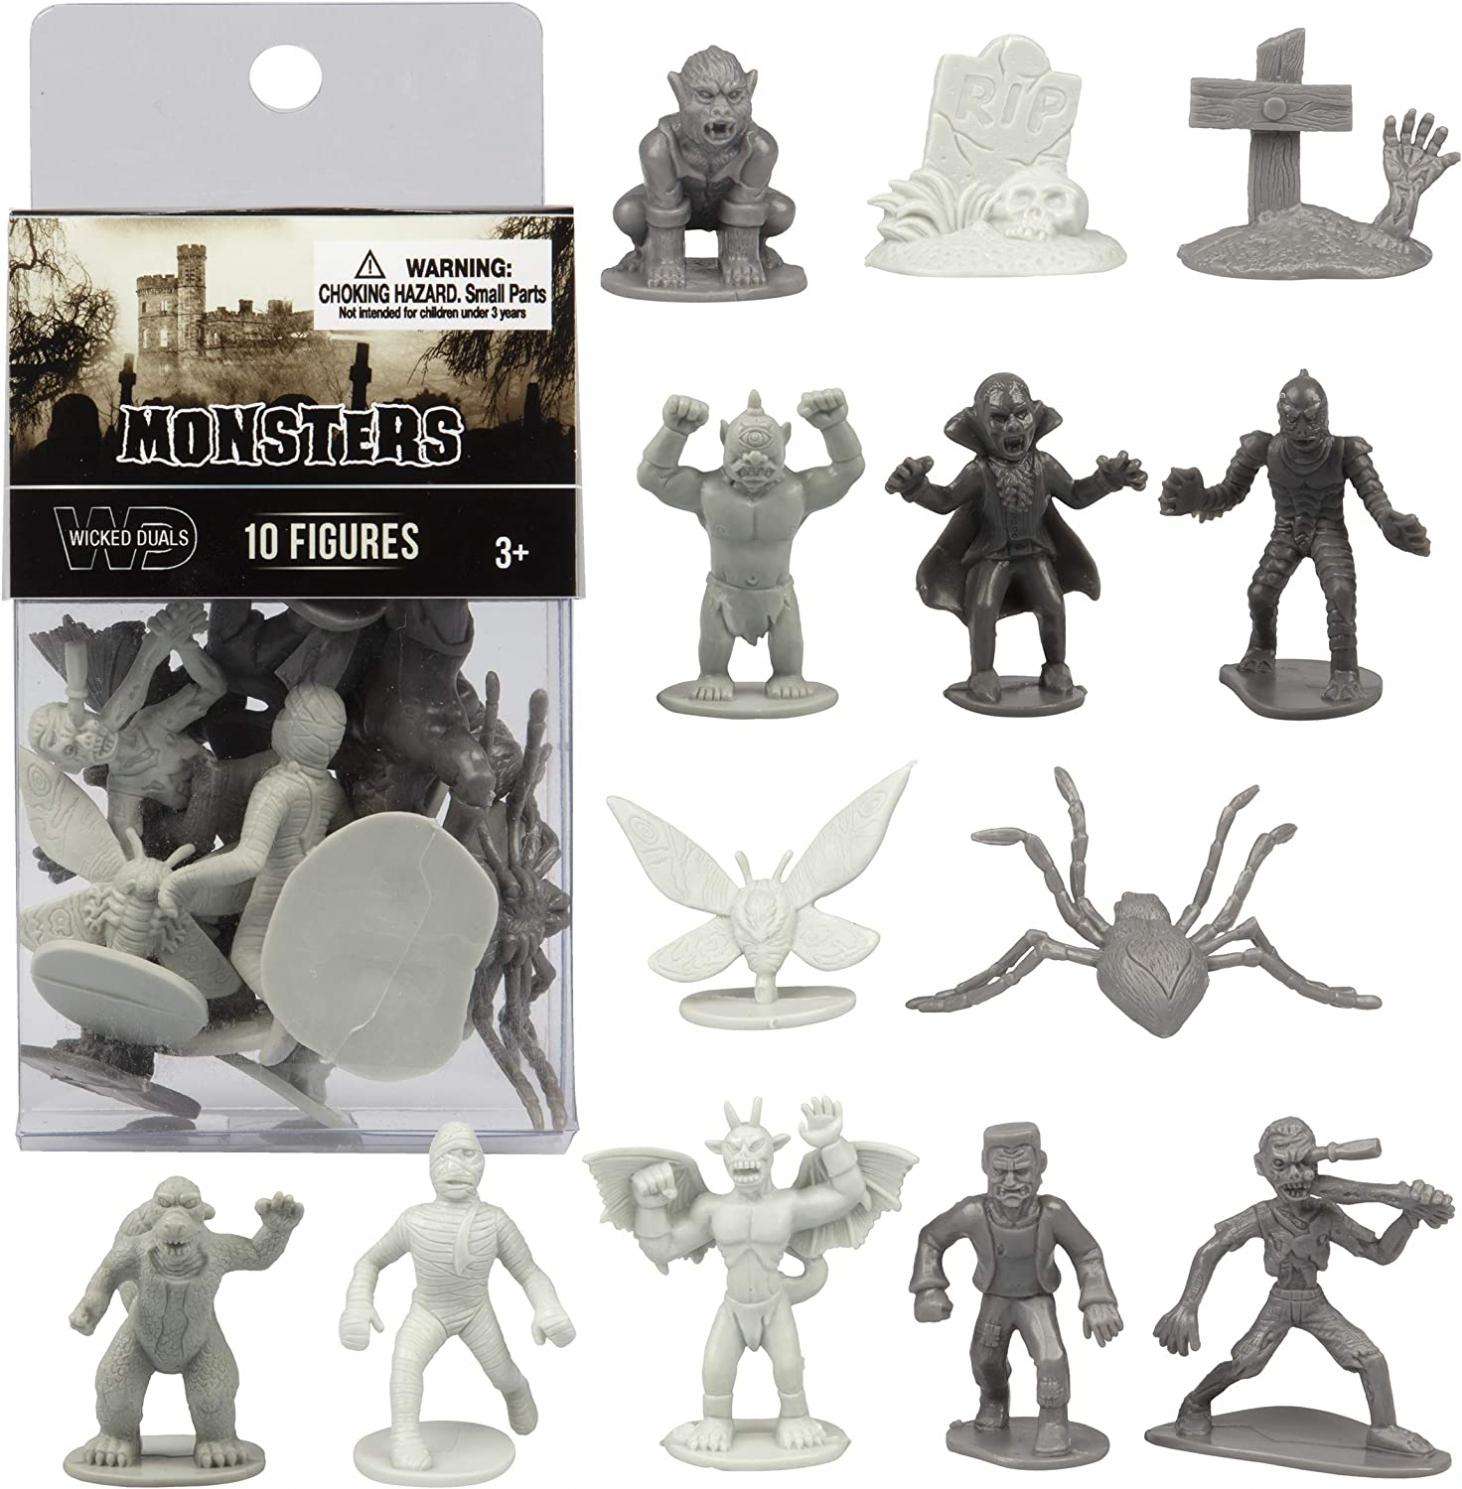 10 Pcs Monster Action Figure Bucket - Horror Toy Figures - from Dracula to Frankenstein to Giant Spiders- Perfect for Cake Toppers, Party Favors, Decorations - Great for Creative and Imaginative Play